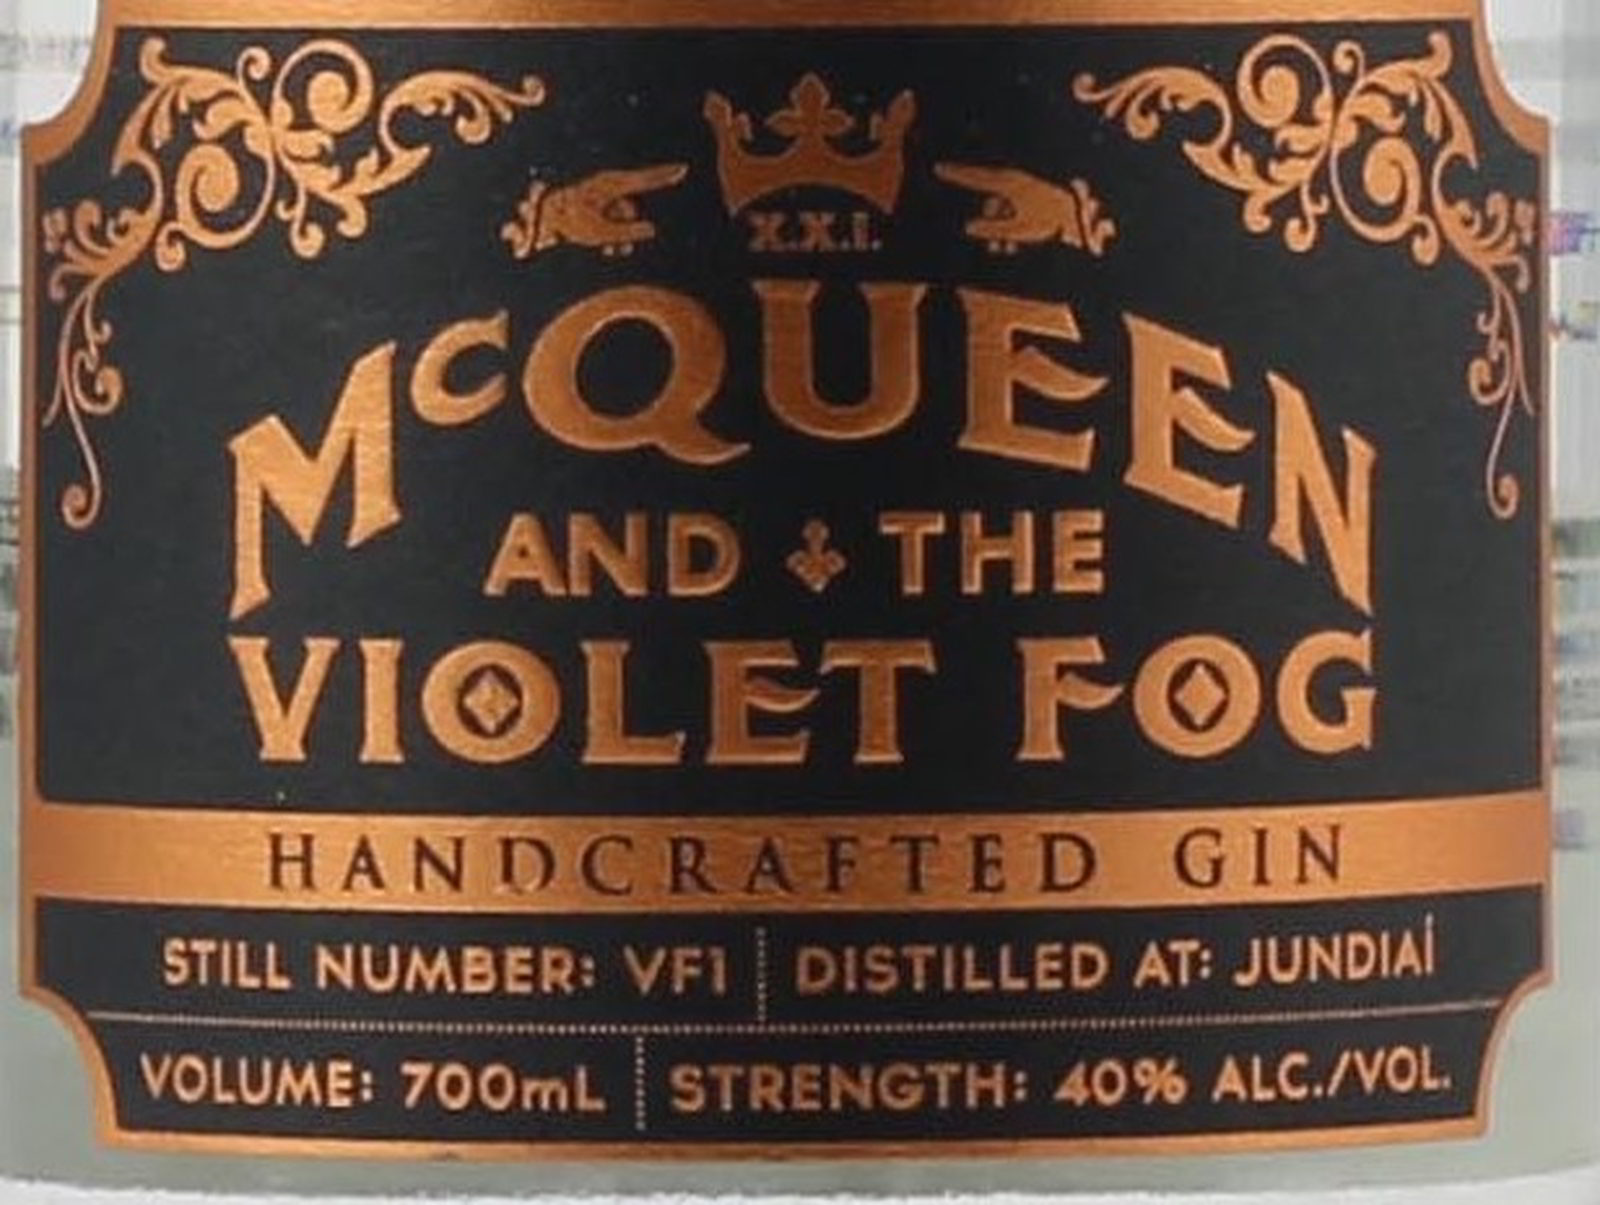 Mcqueen and the violet fog Gin 0,7 Liter 40 % Vol. , on